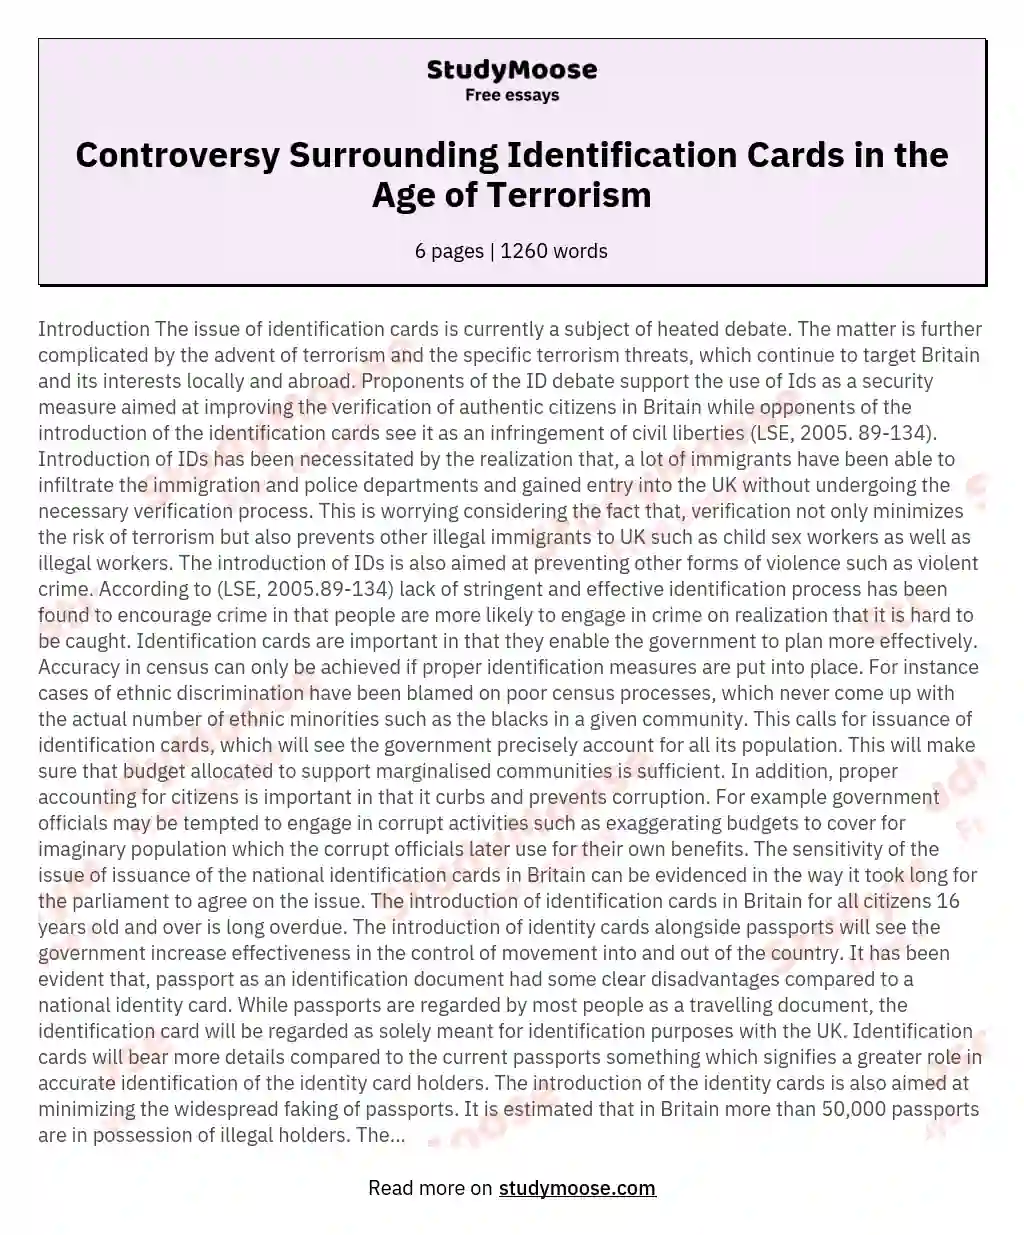 Controversy Surrounding Identification Cards in the Age of Terrorism essay